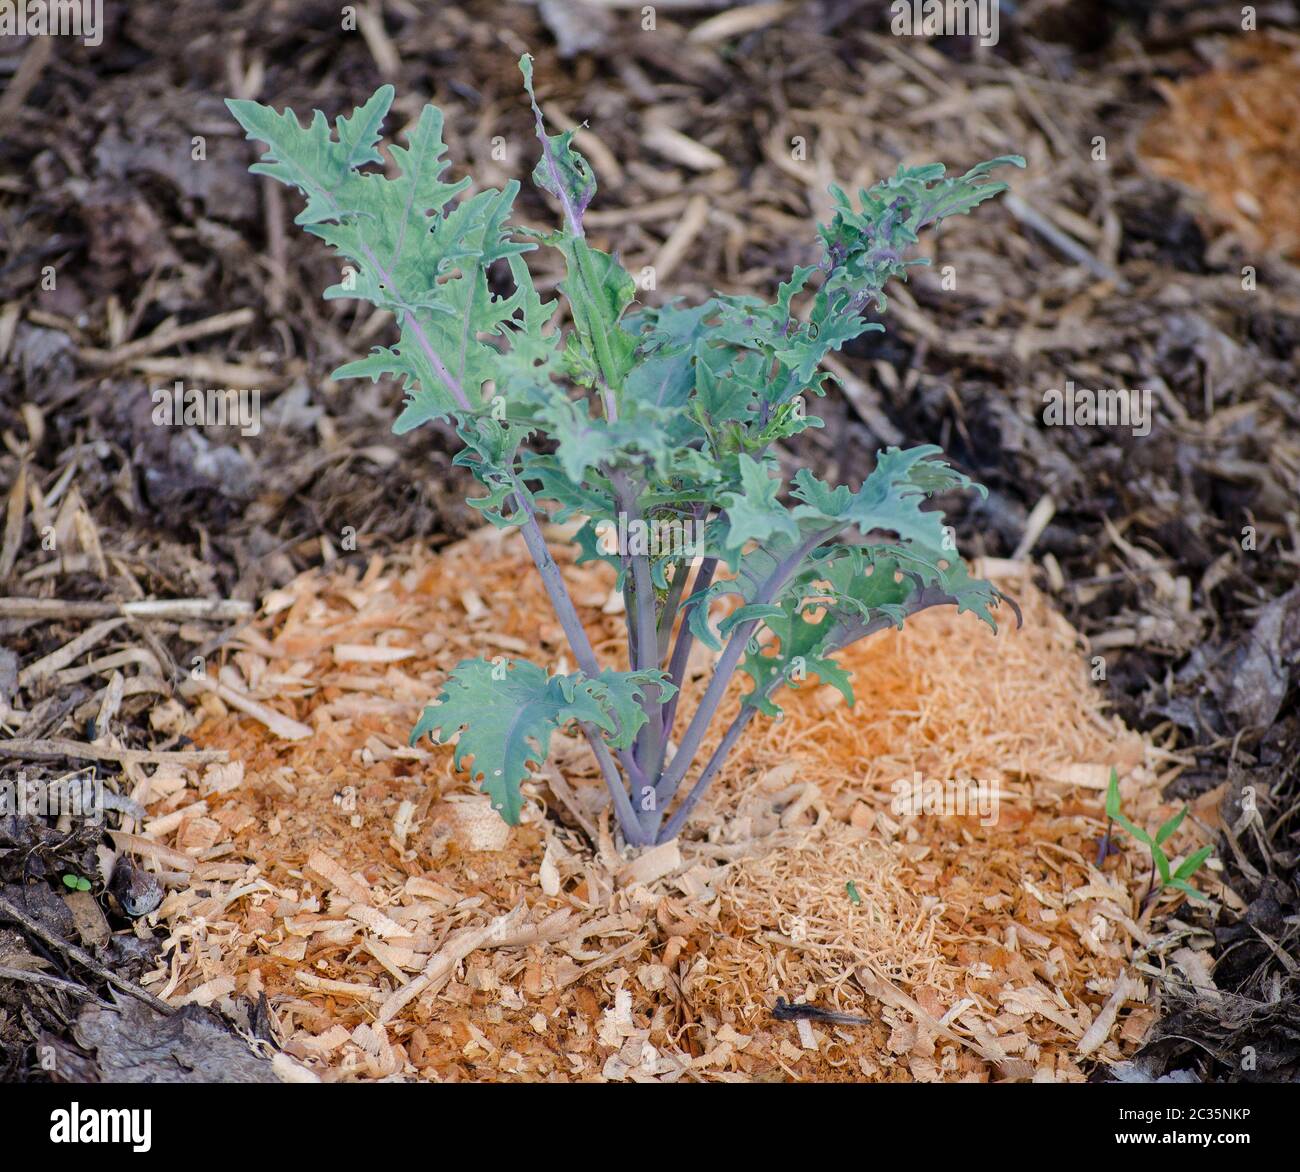 A young kale plant in a mulched garden bed. Stock Photo